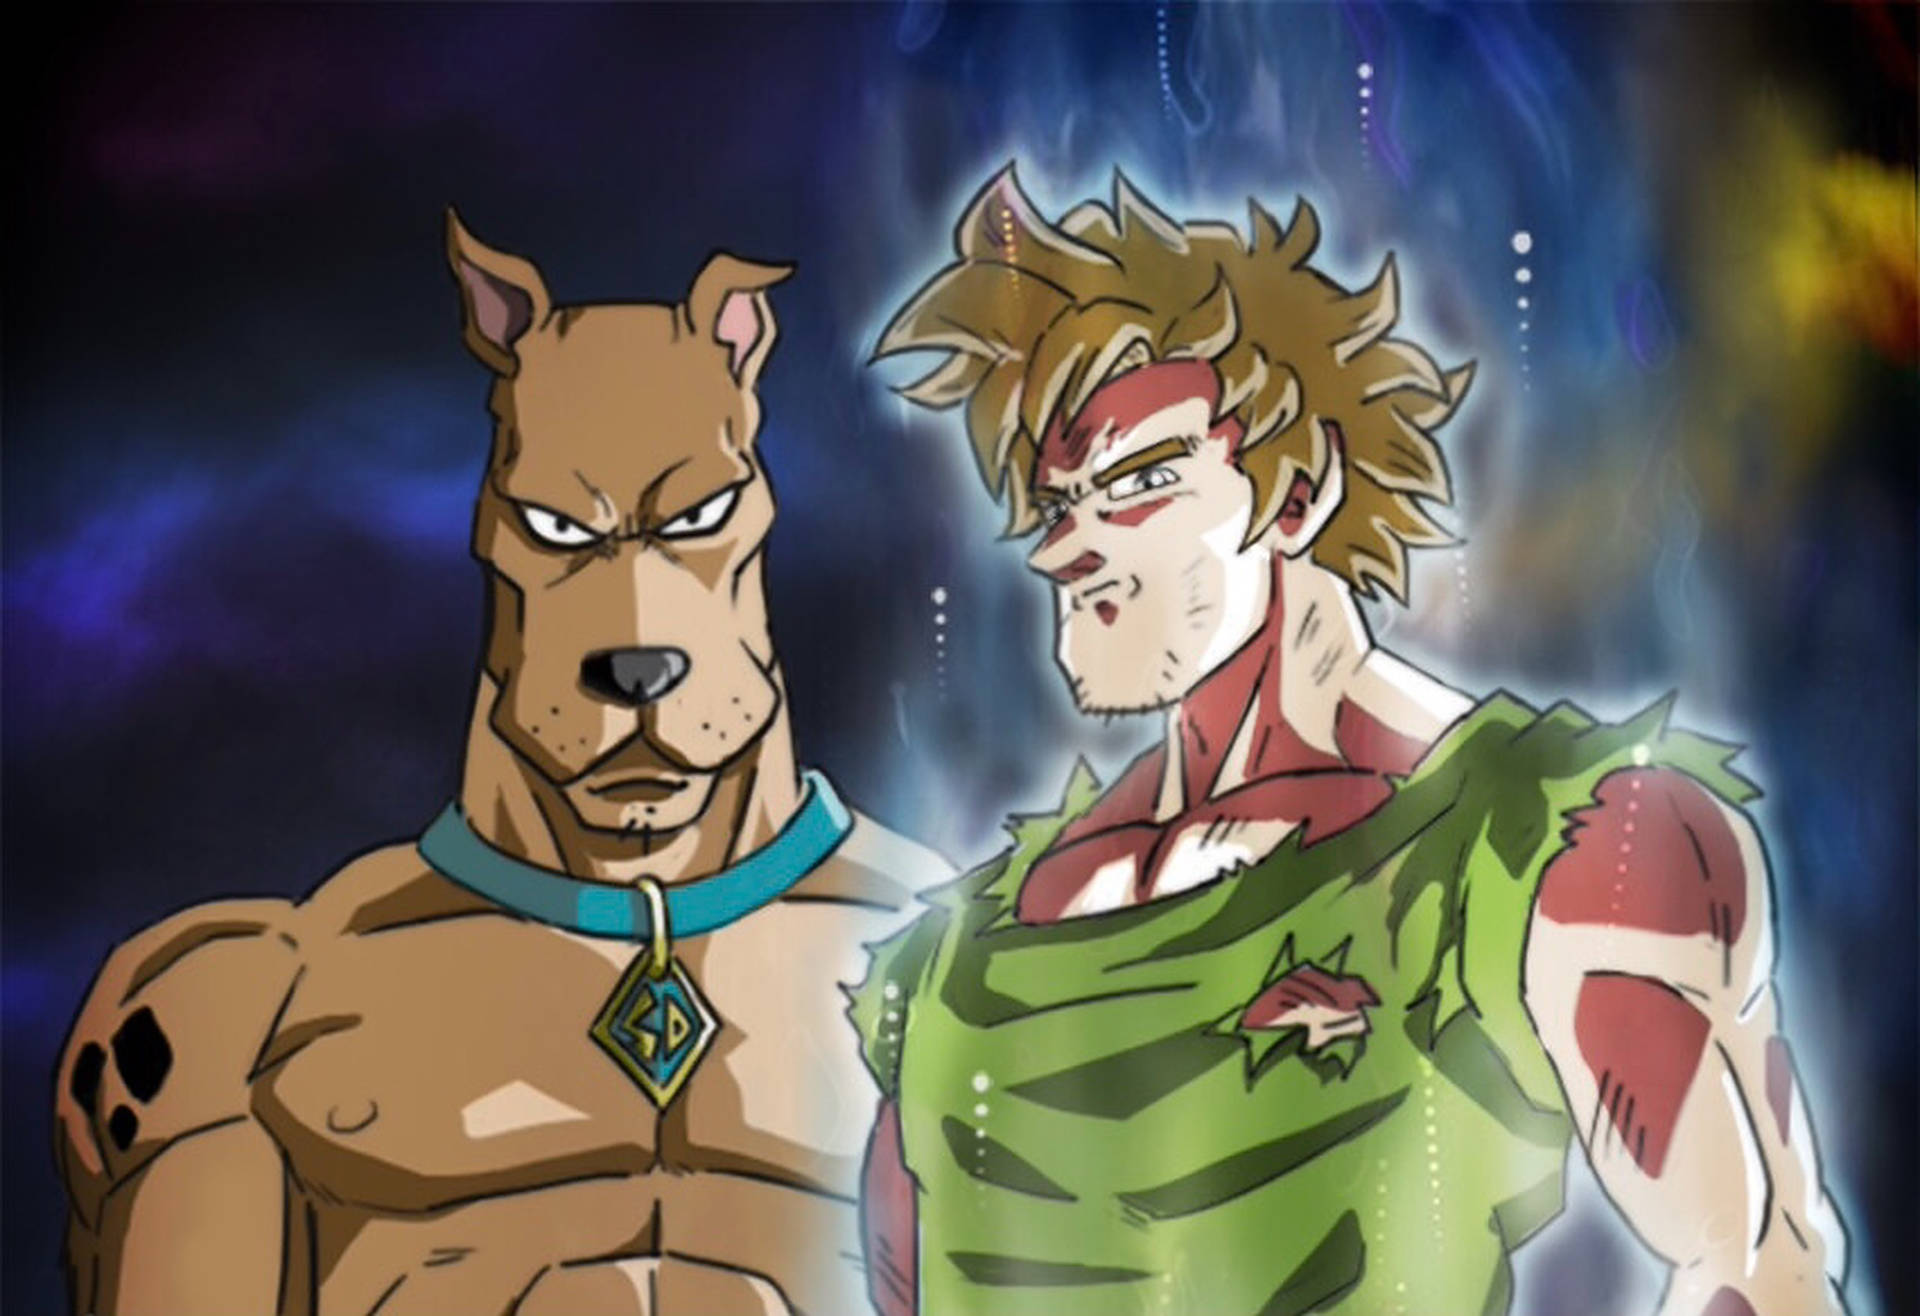 Shaggy Dominating With His Ultra Instinct Power Alongside Scooby Doo